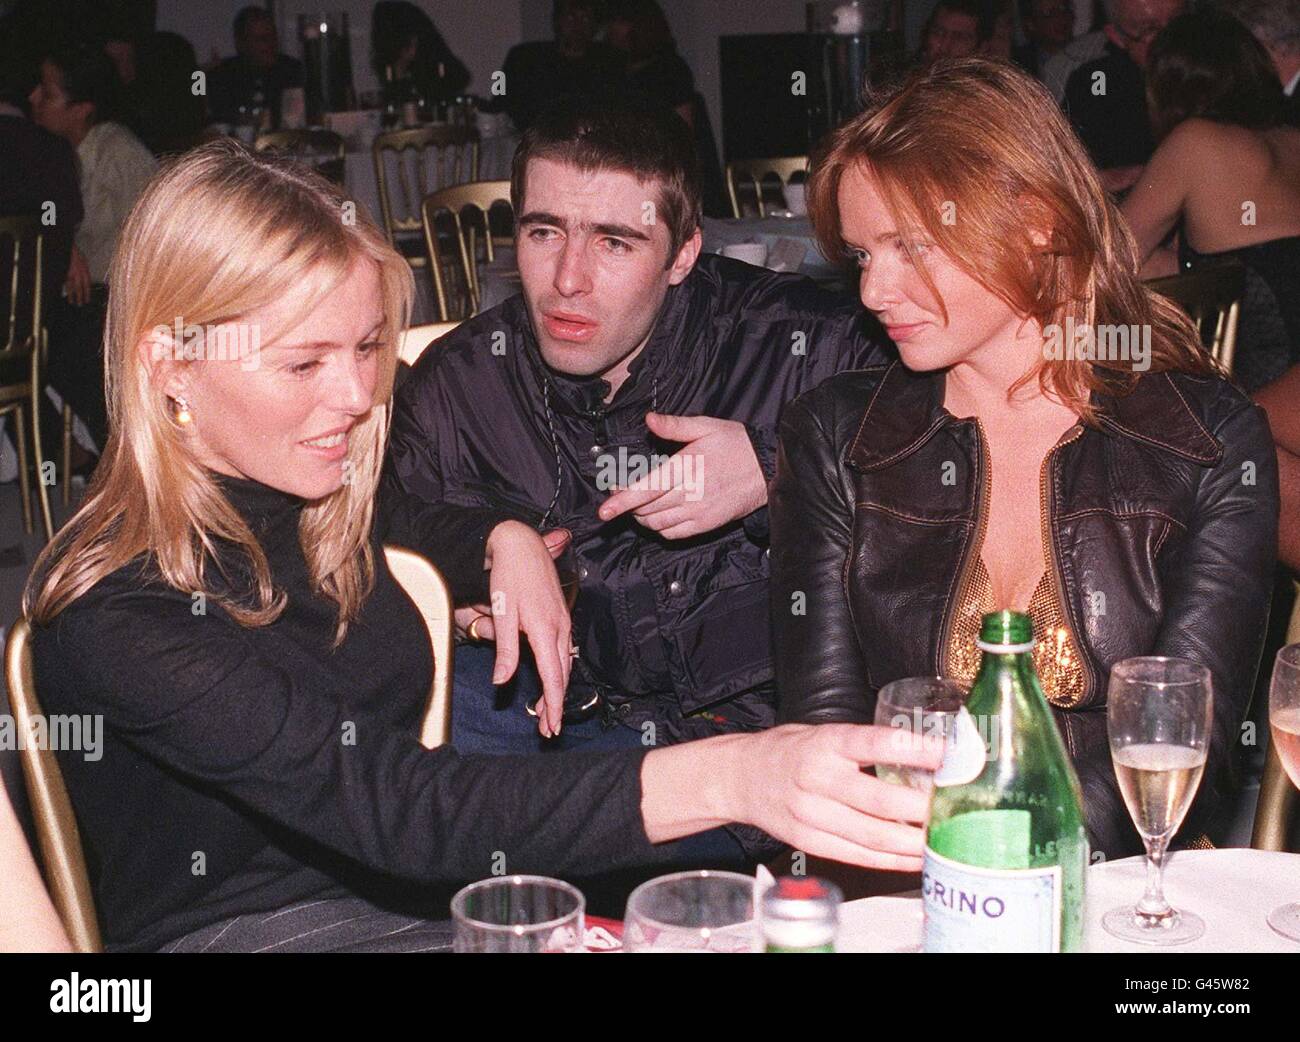 Oasis singer Liam Gallagher talks with girlfriend Patsy Kensit (left) and Stella McCartney, at last night's War Child charity auction, held at the Saatchi Gallery, in London. Photo by Sam Pearce/PA Stock Photo